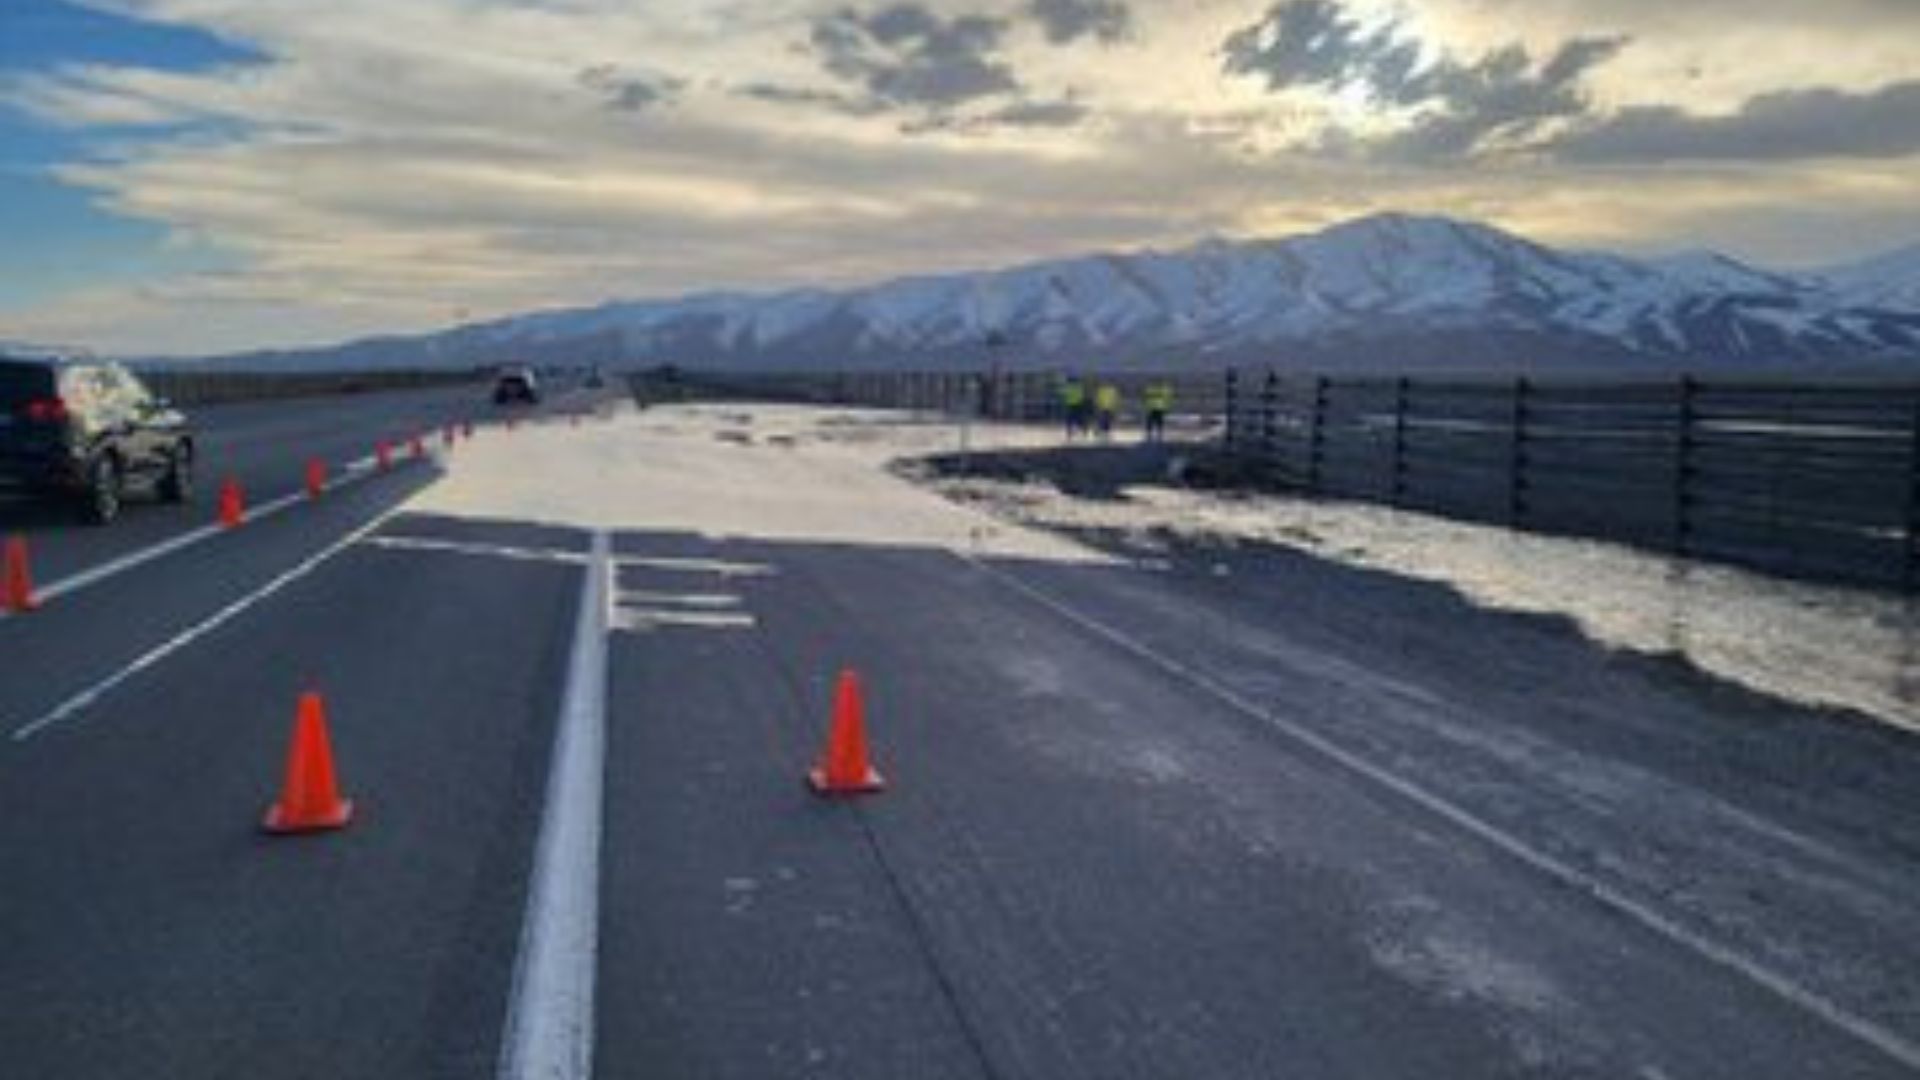 Spring runoff leads to flooding closures on Utah roads, trails